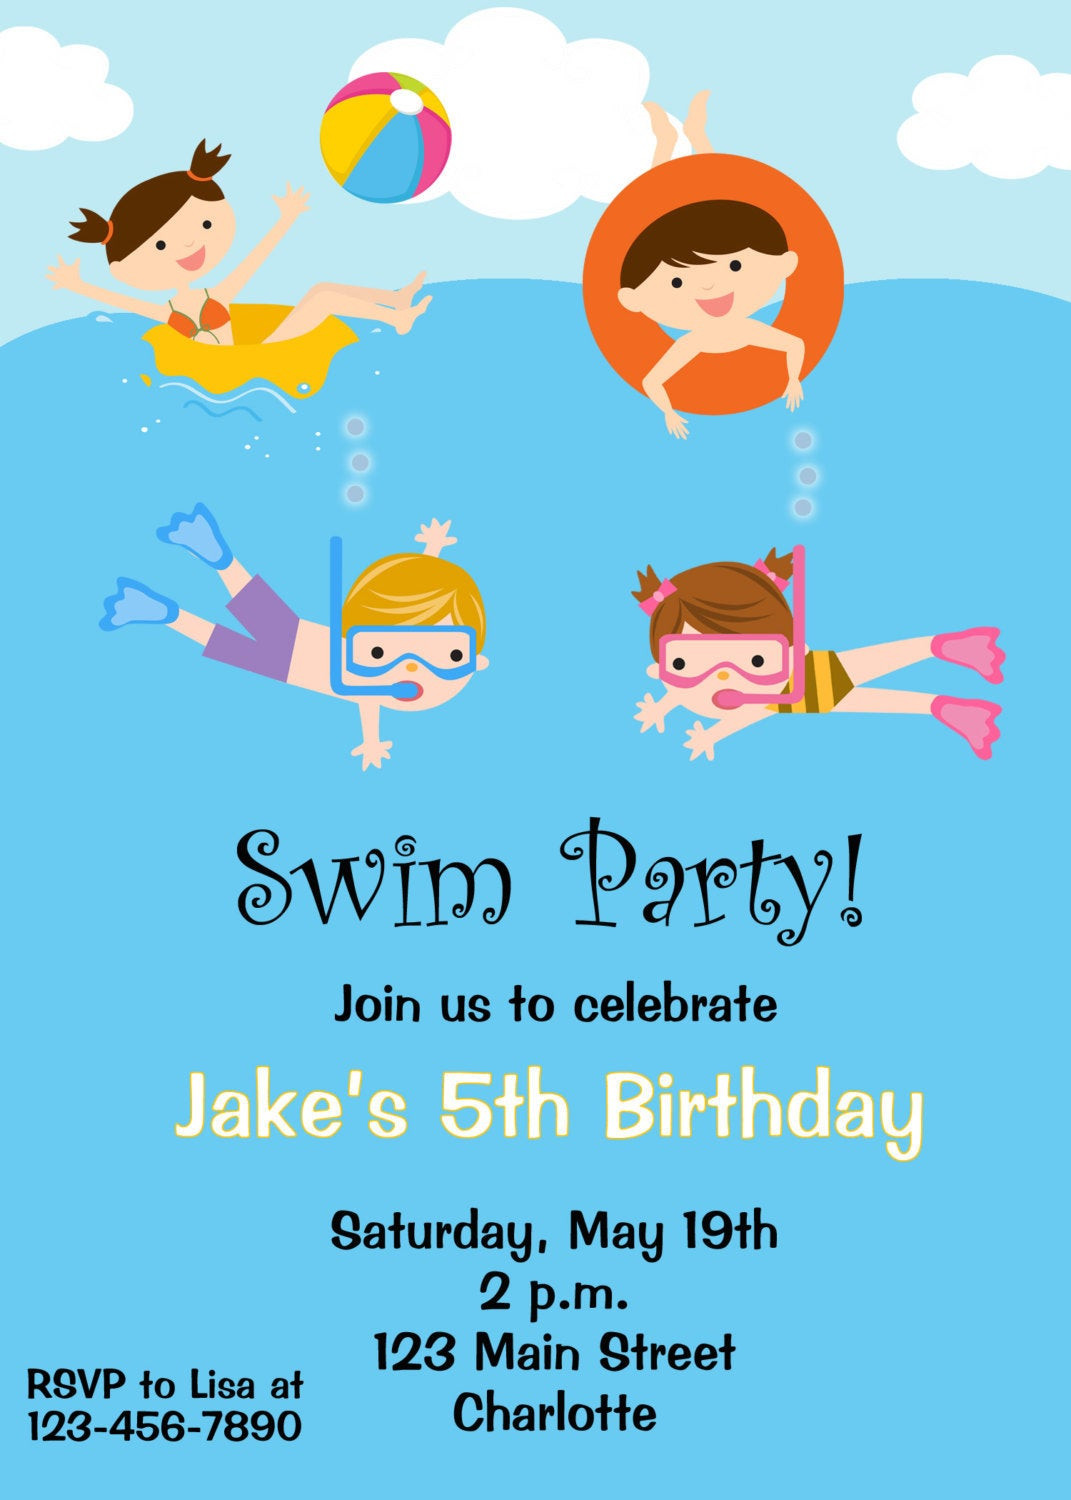 Pool Party Birthday Invitations
 Pool party birthday invitation pool party pool toys